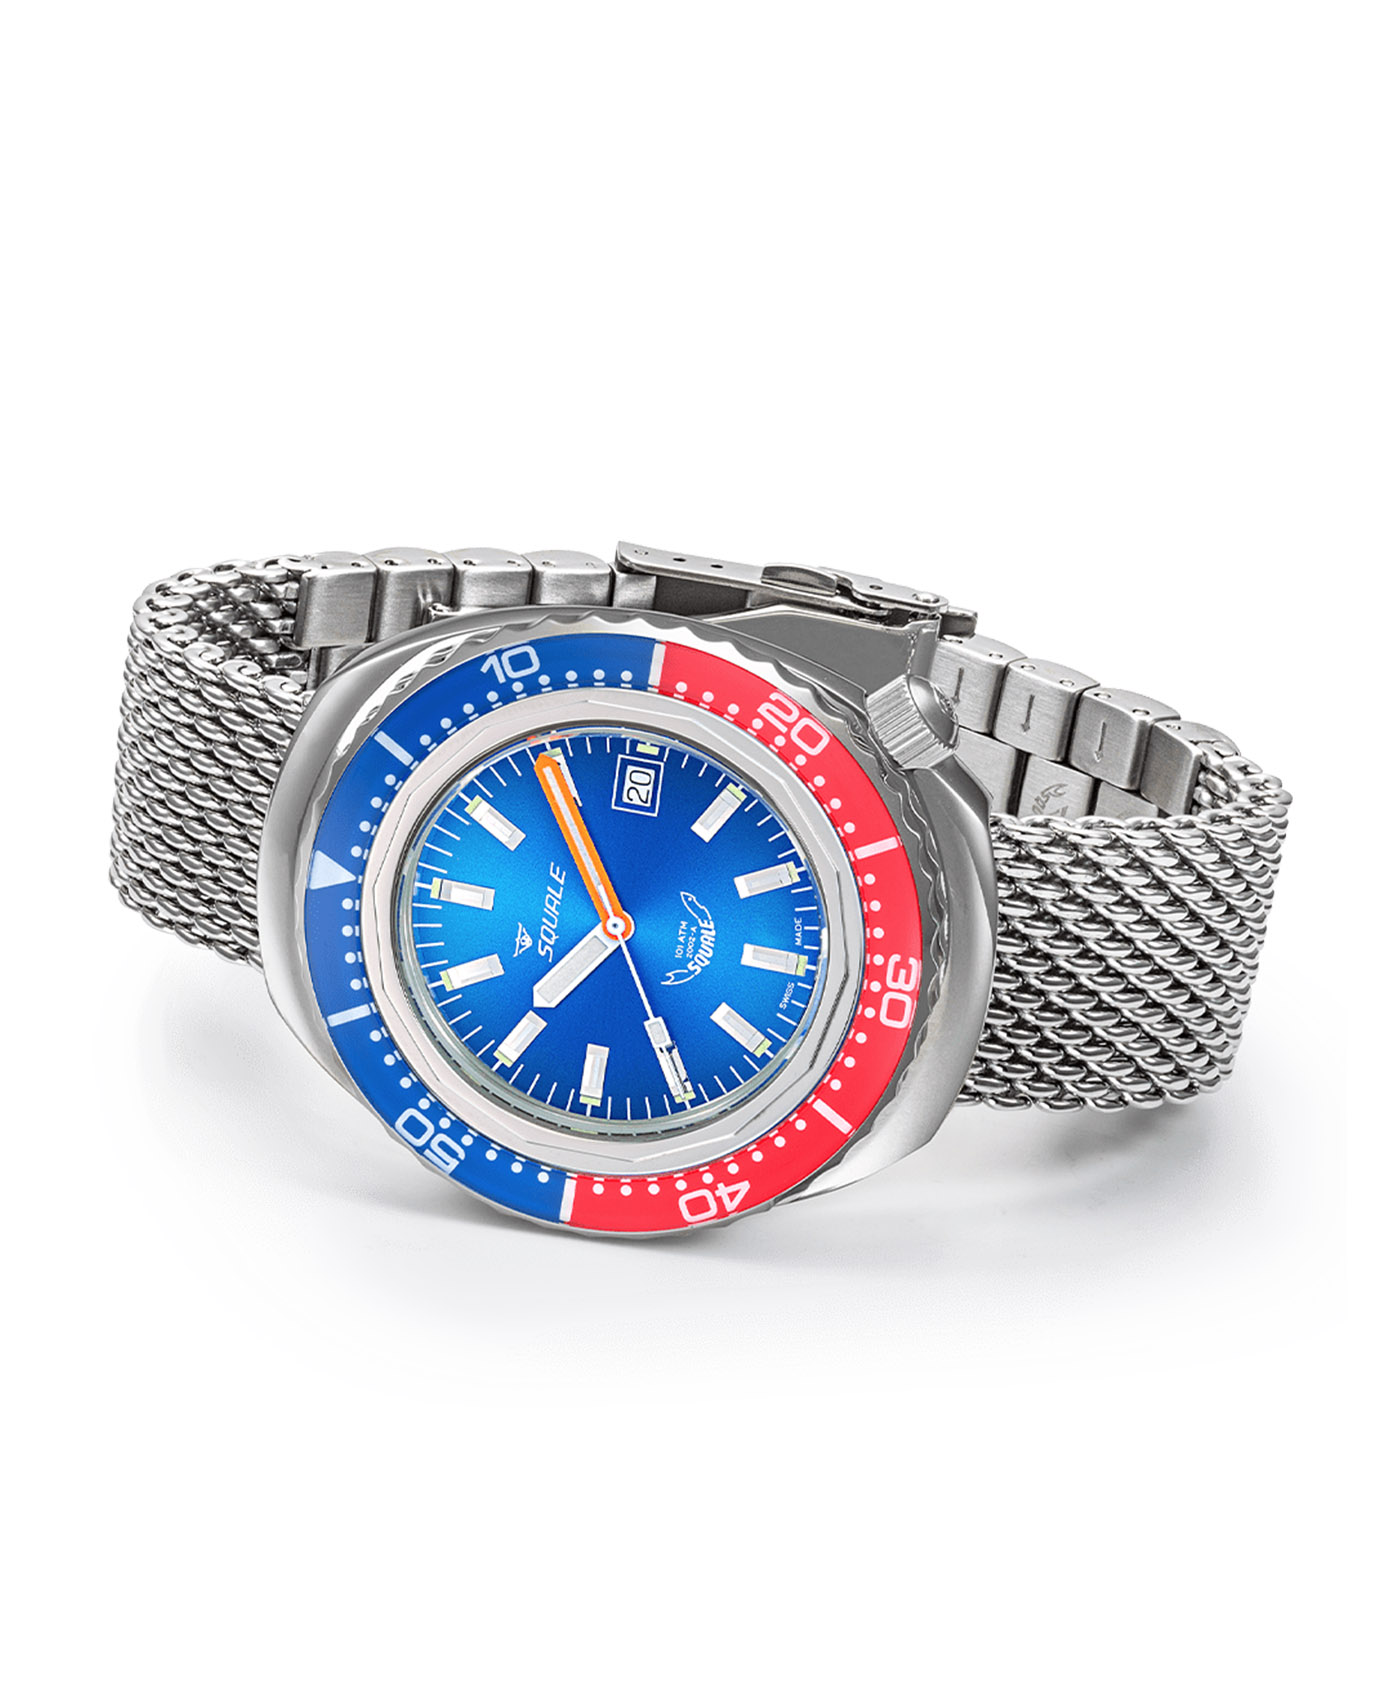 Squale-2002 Series-101 Atmos-Polished-Blue-dial-Blue-Red-bezel-side